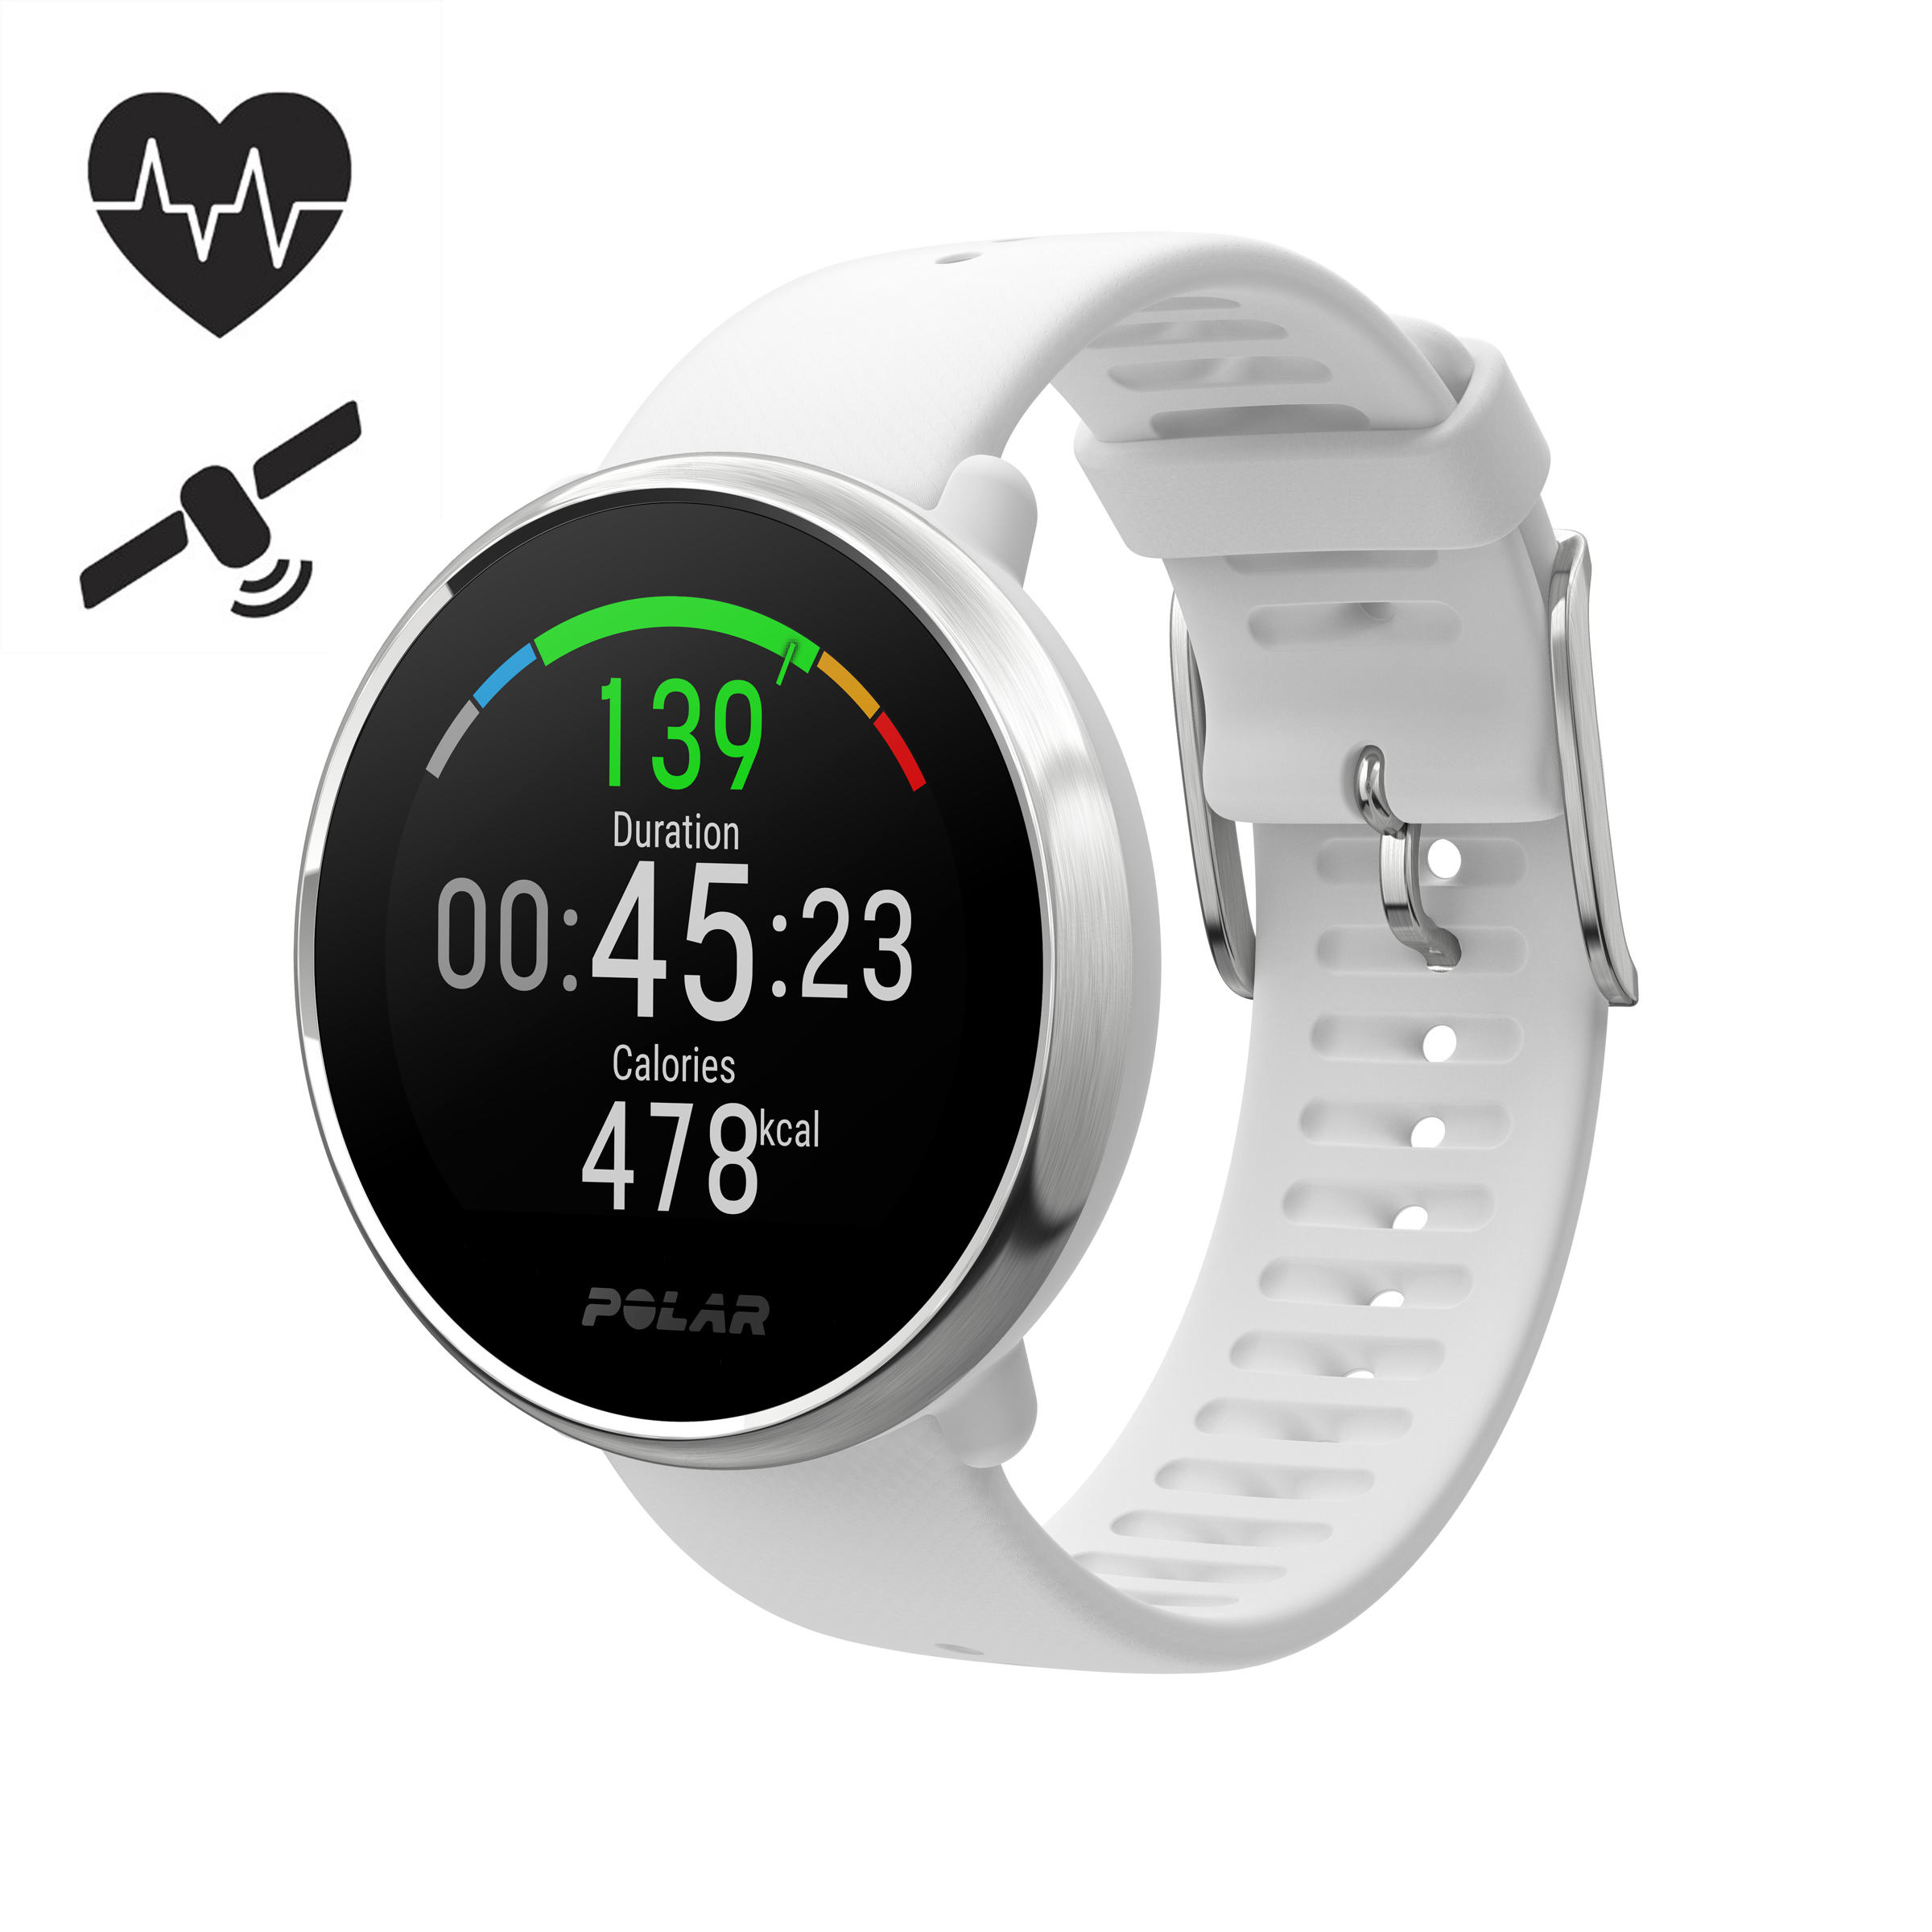 IGNITE GPS wrist watch with heart rate monitor white M/L 2/8